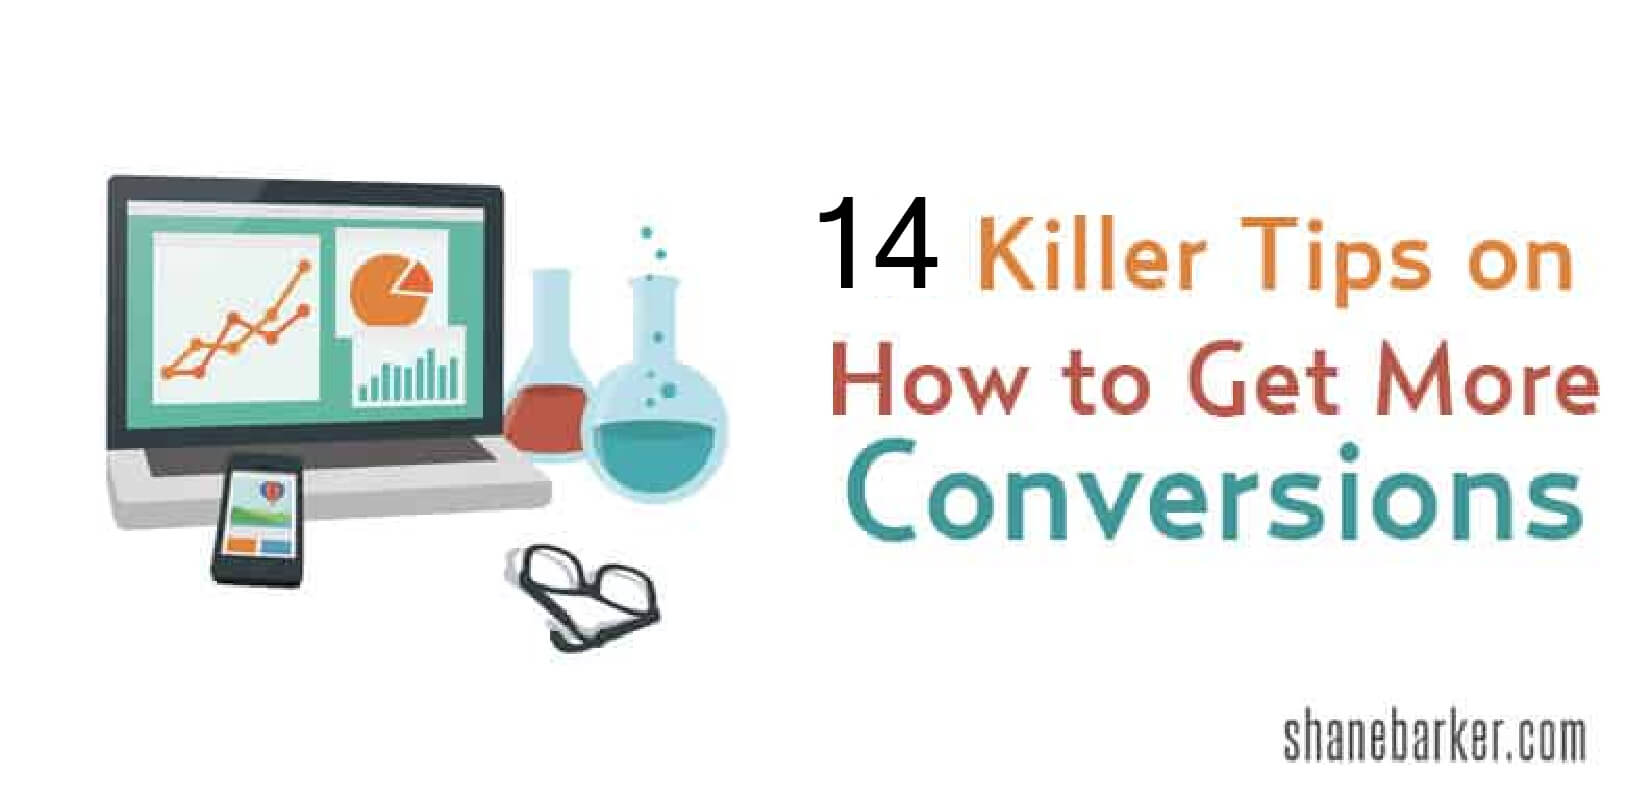 14 killer tips on how to get more conversions